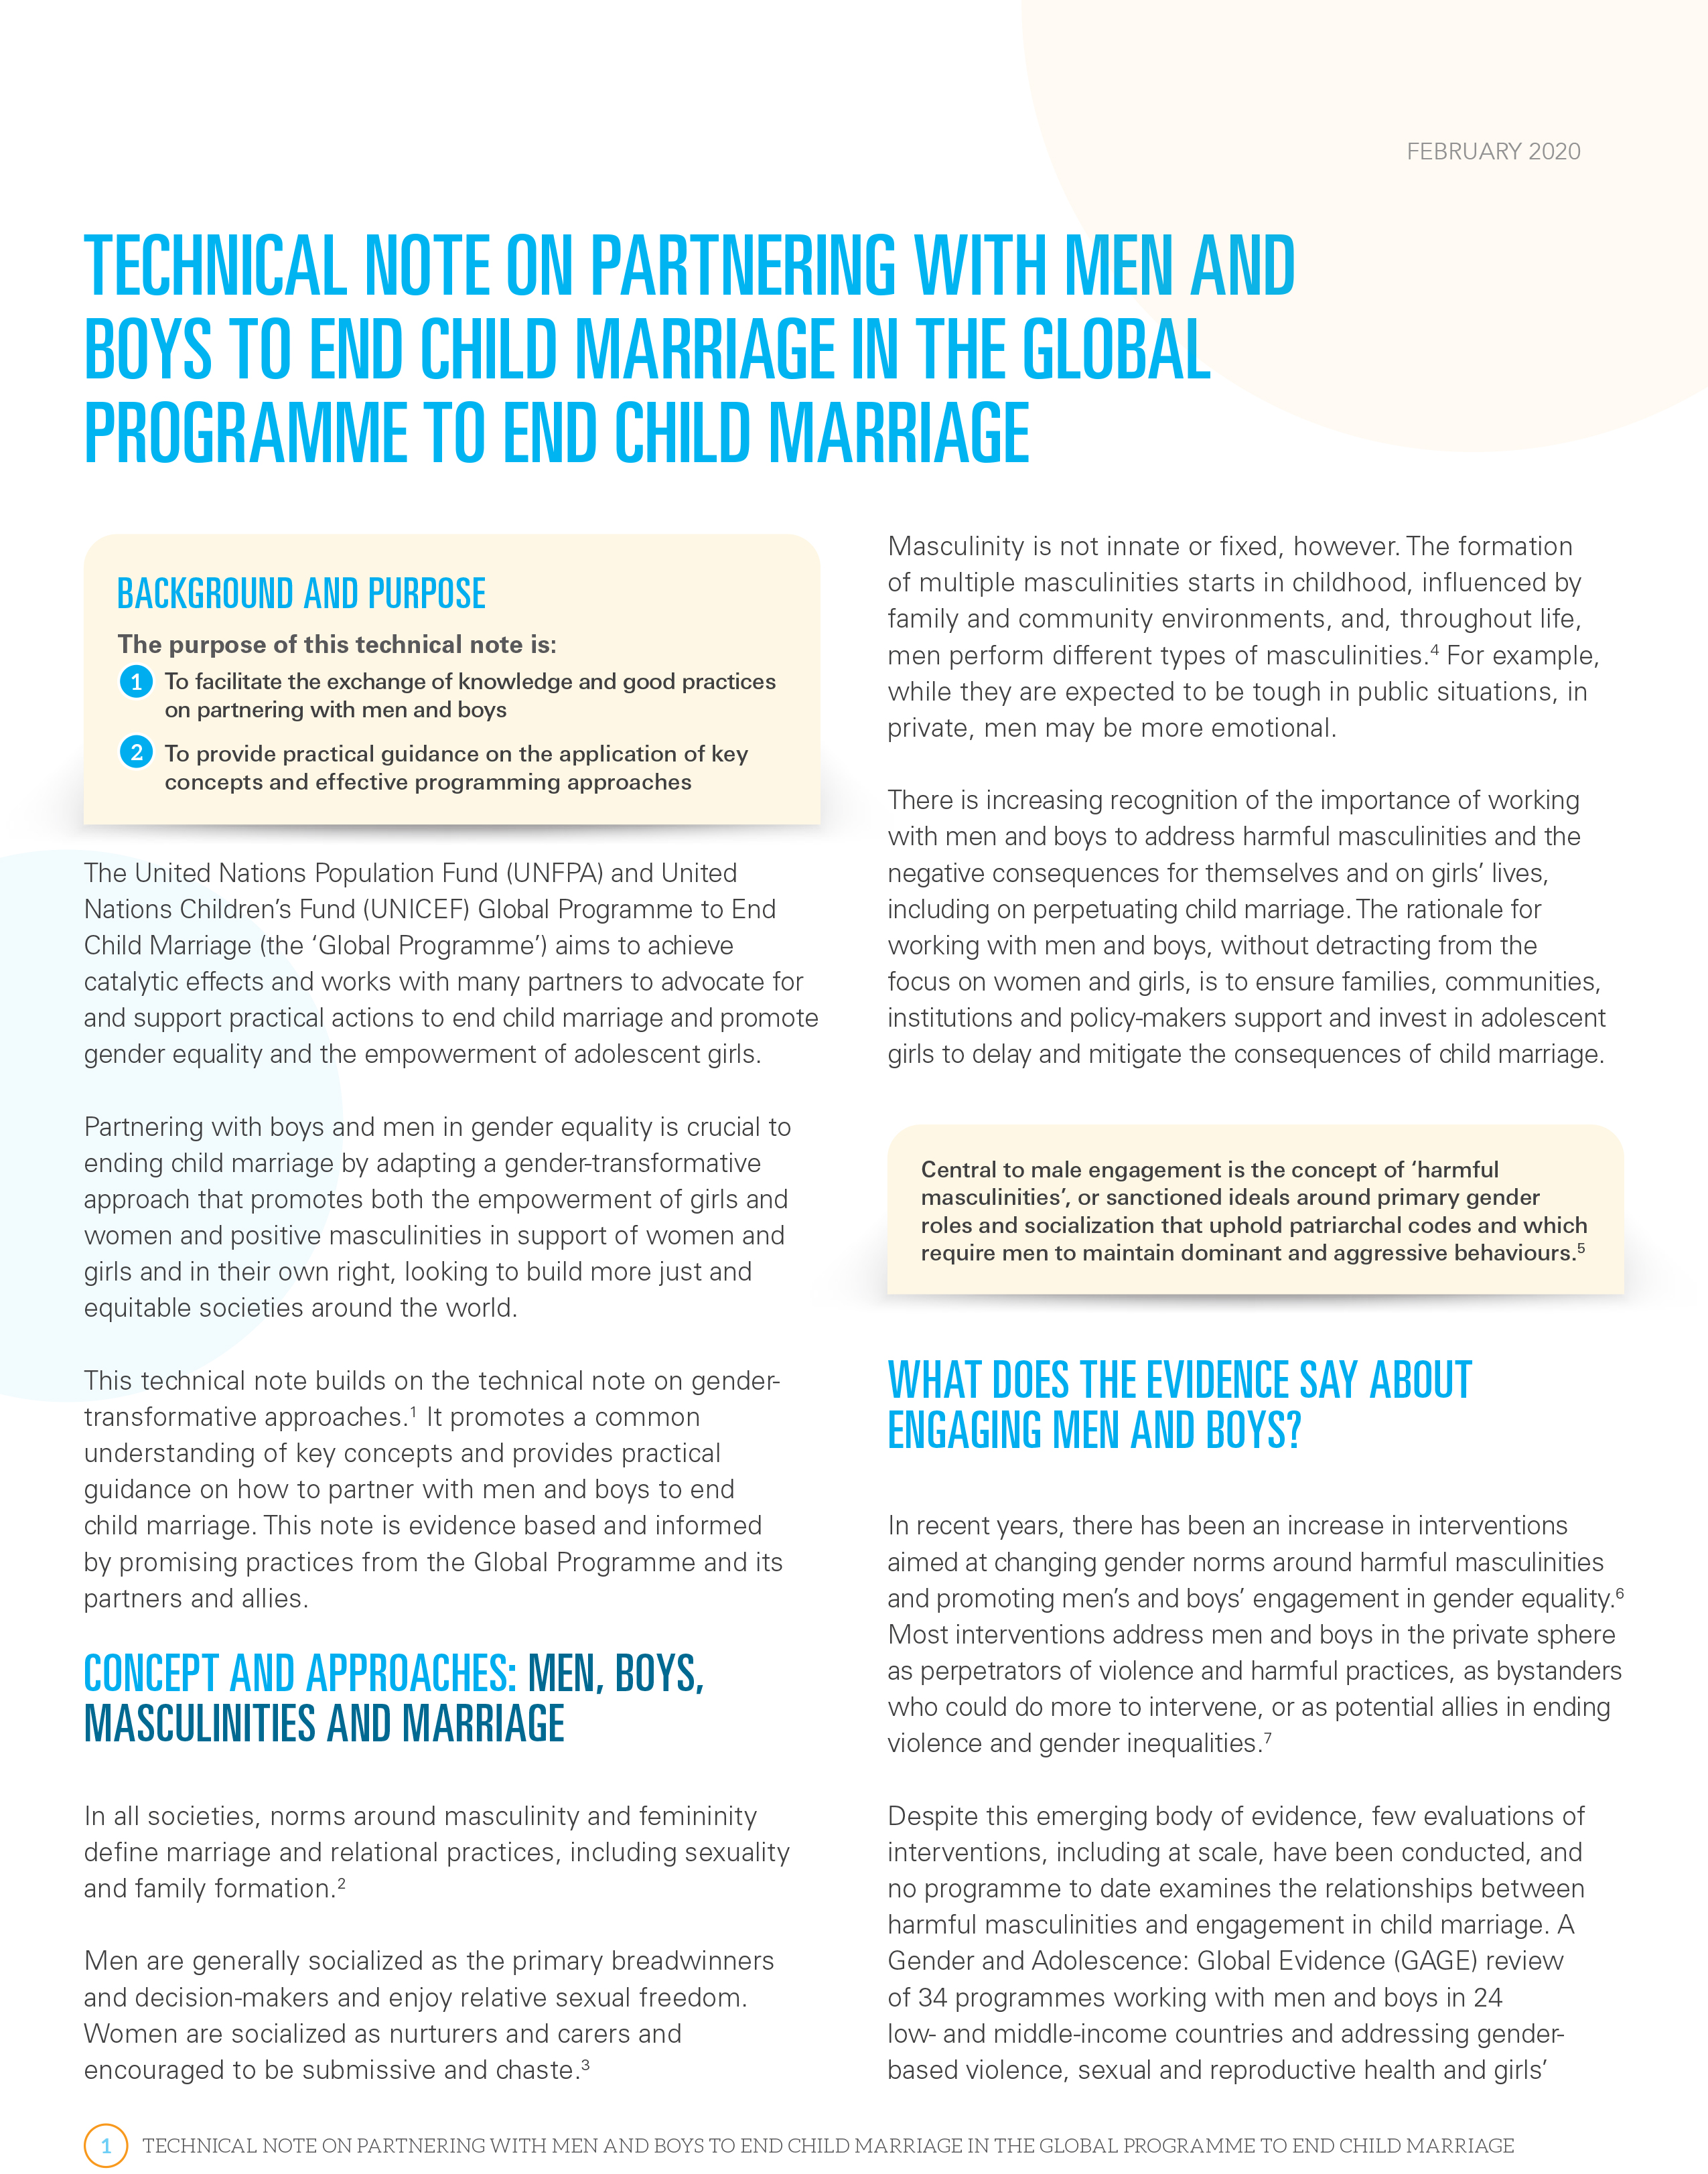 Technical Note on Partnering with Men and Boys to End Child Marriage in the Global Programme to End Child Marriage picture